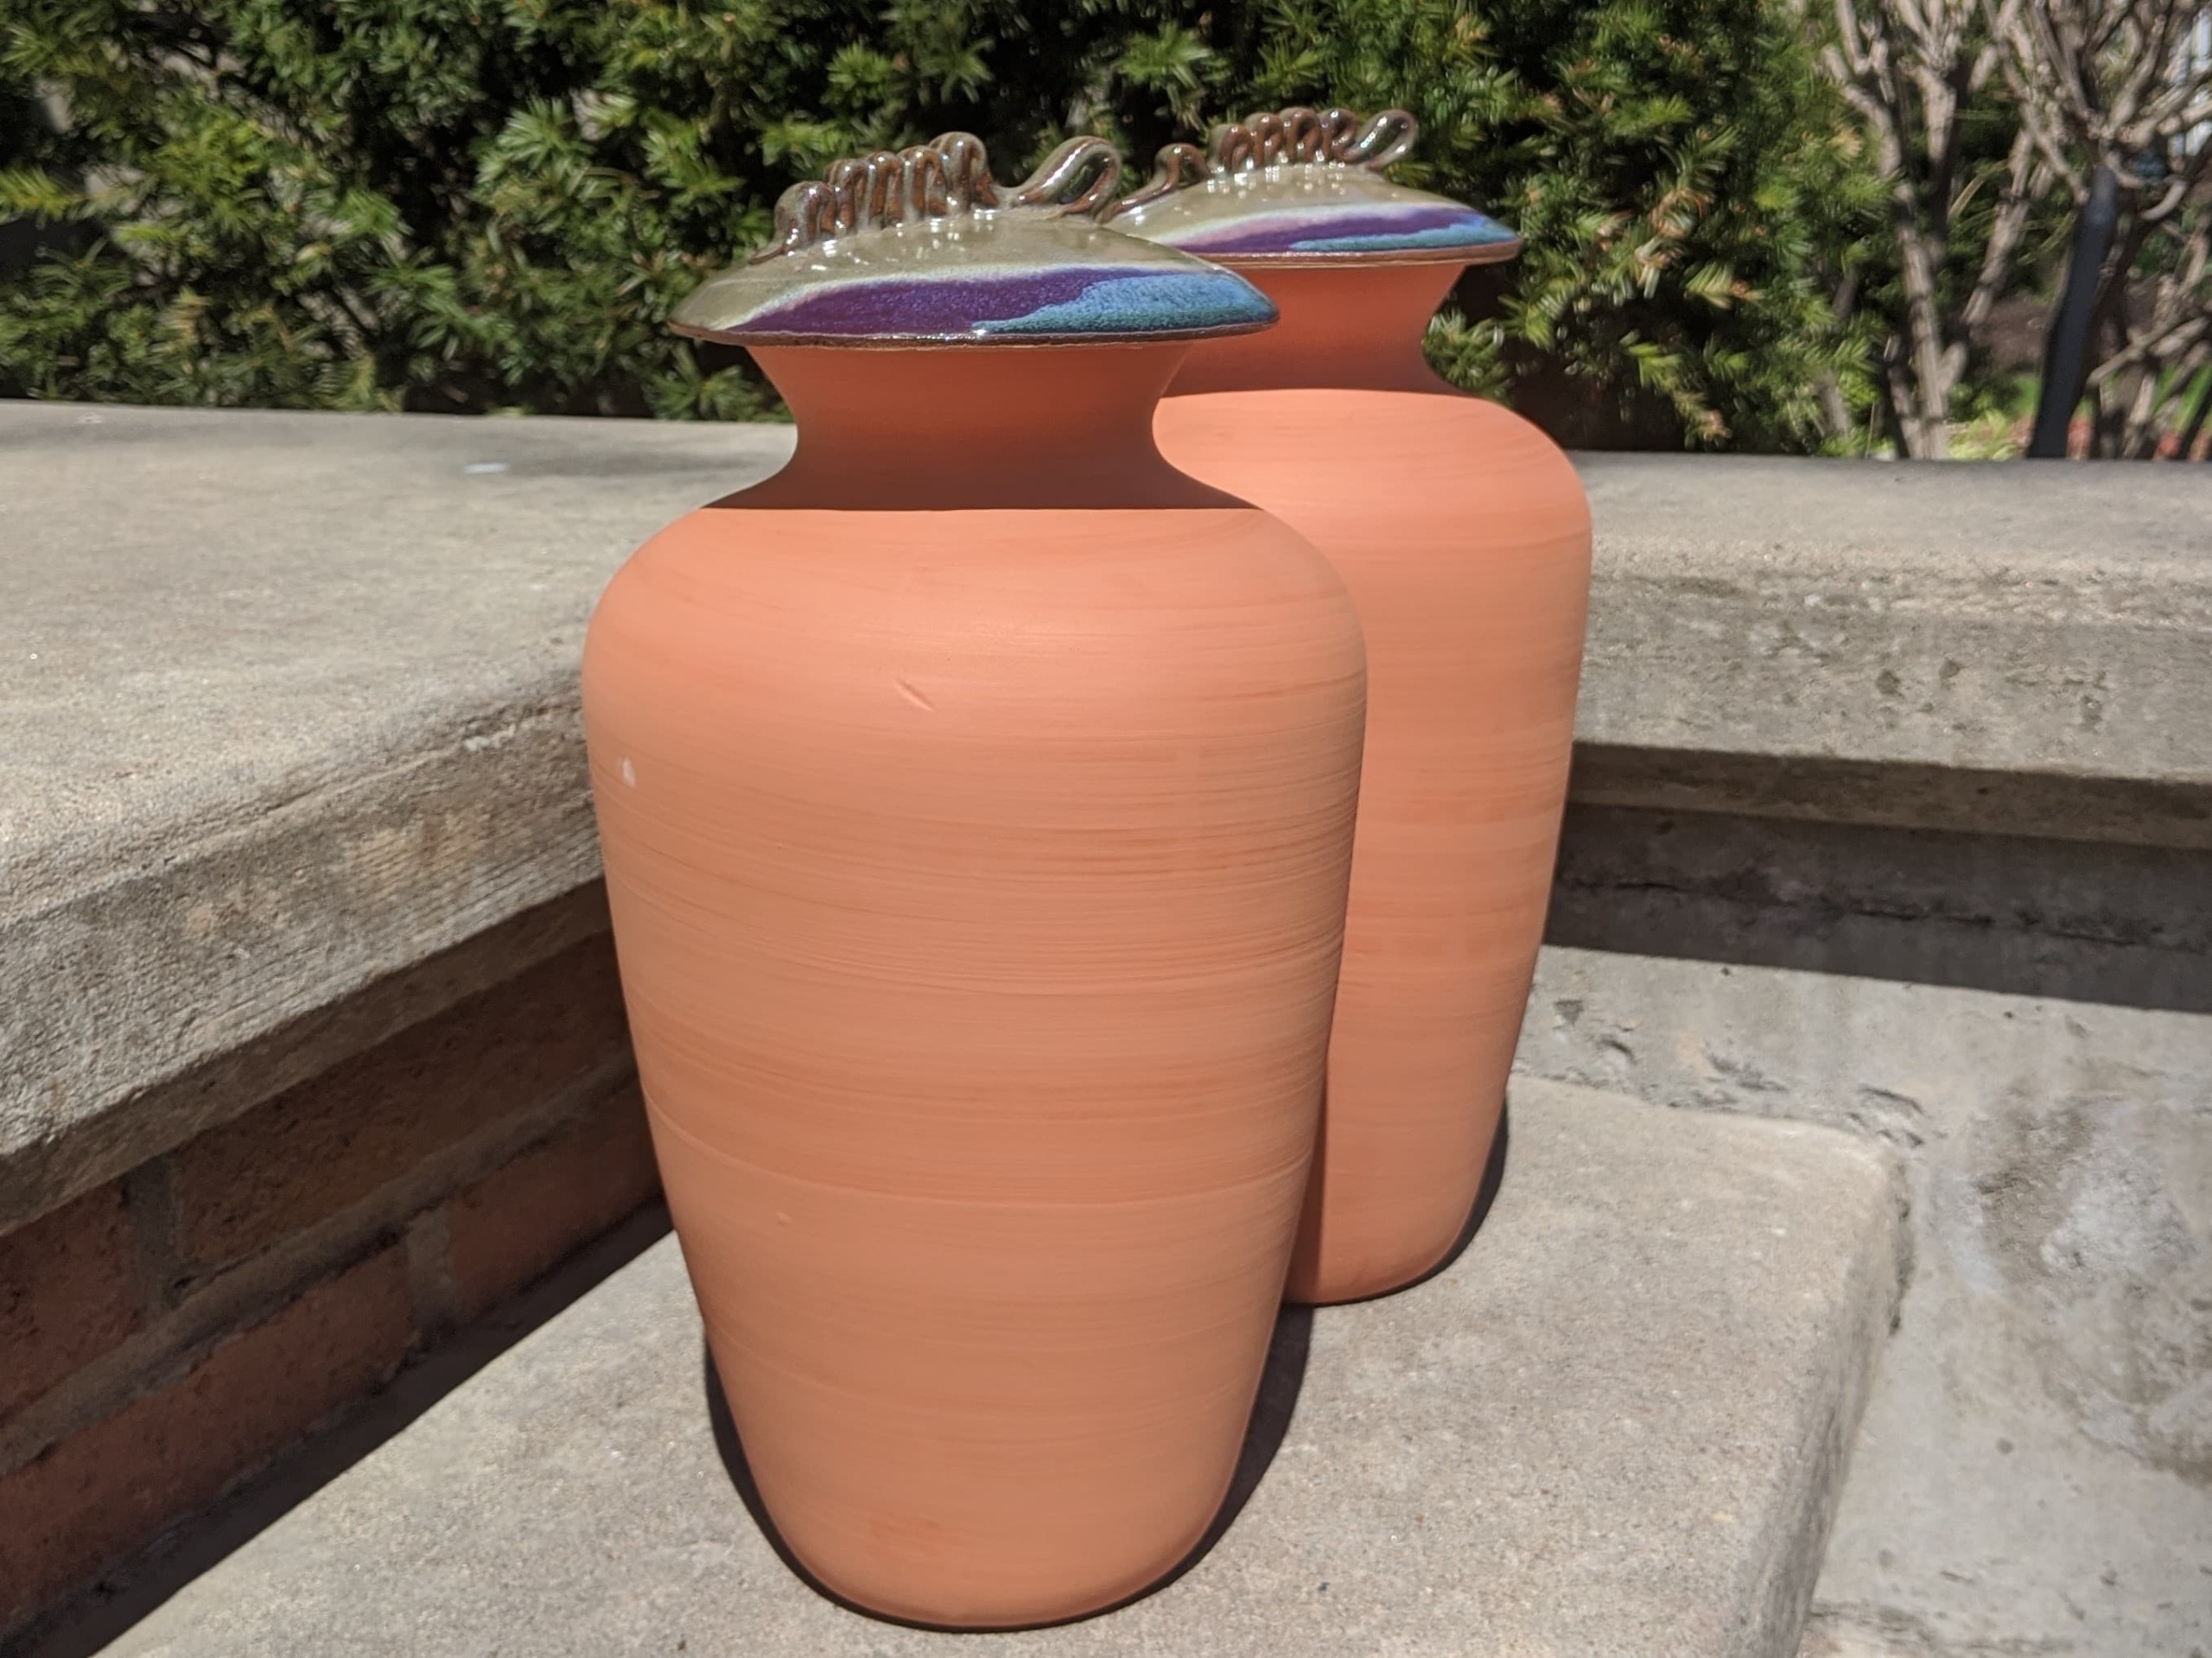 THE OLLA COMPANY | Classic Olla Watering Pot – Set of 2 | Holds 12 Ounces |  Plant Watering Bulb Olla Watering System with Terra Cotta Irrigation Pots